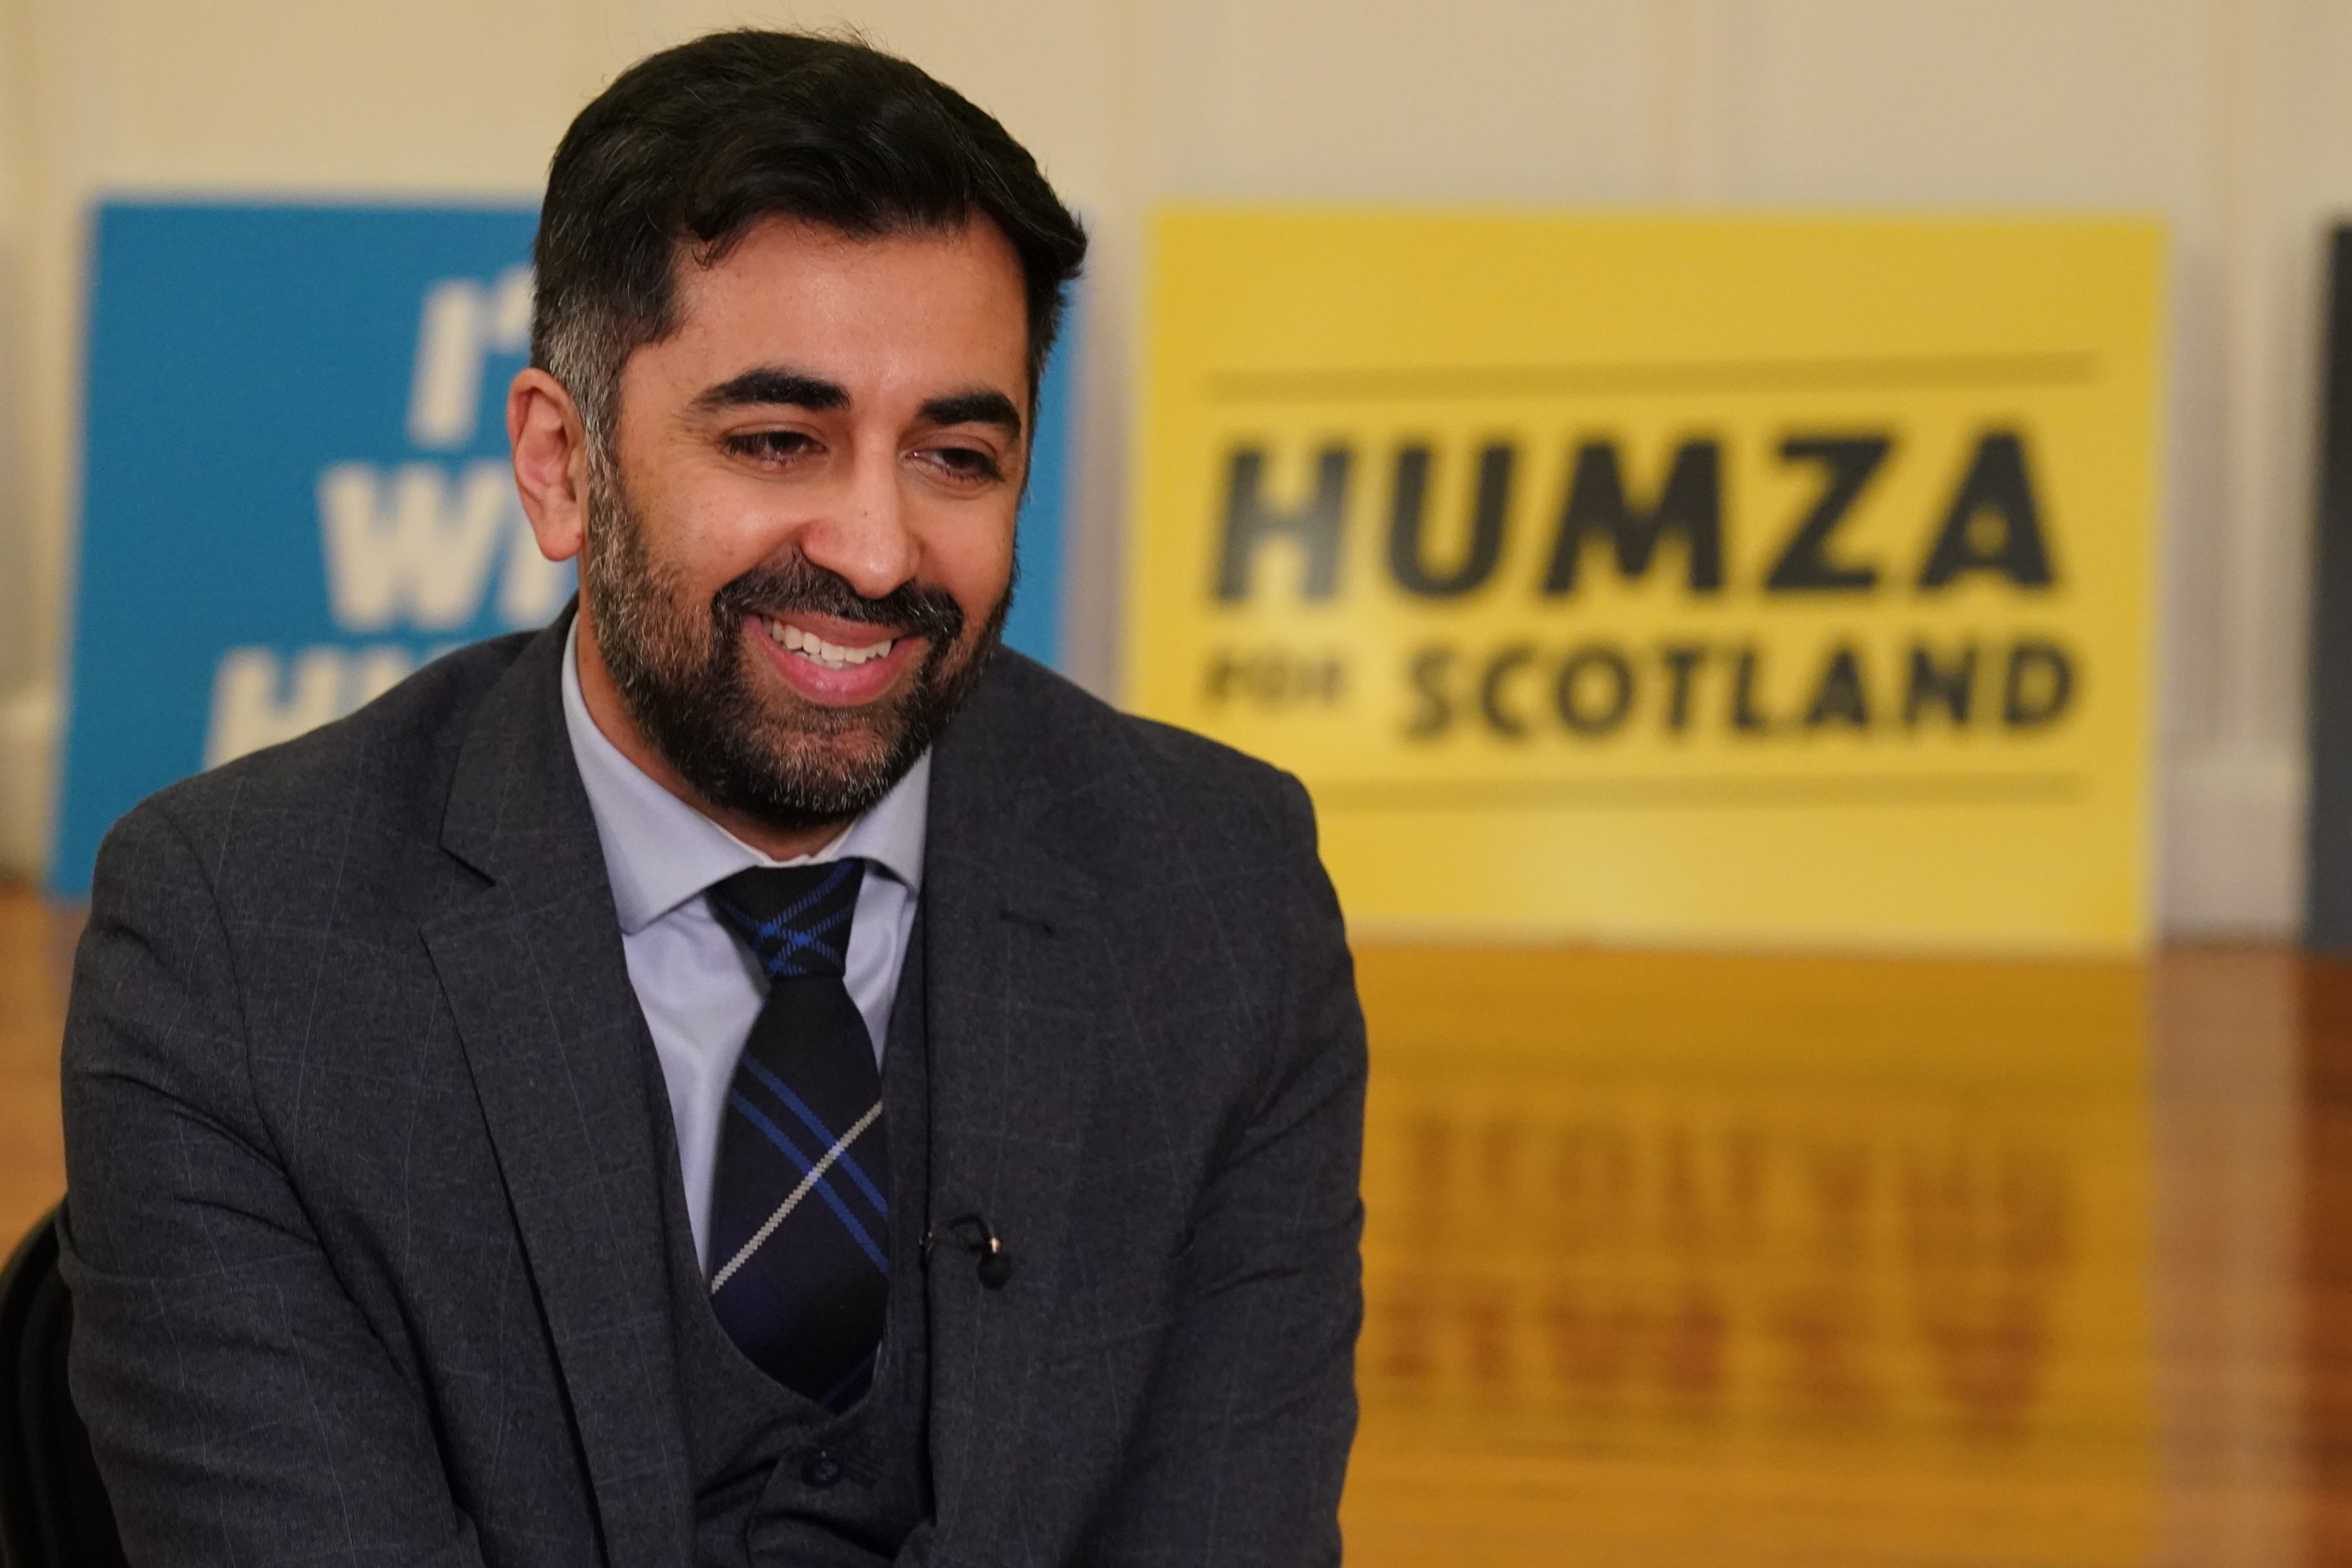 Scottish health secretary Humza Yousaf is odds-on to win the leadership contest